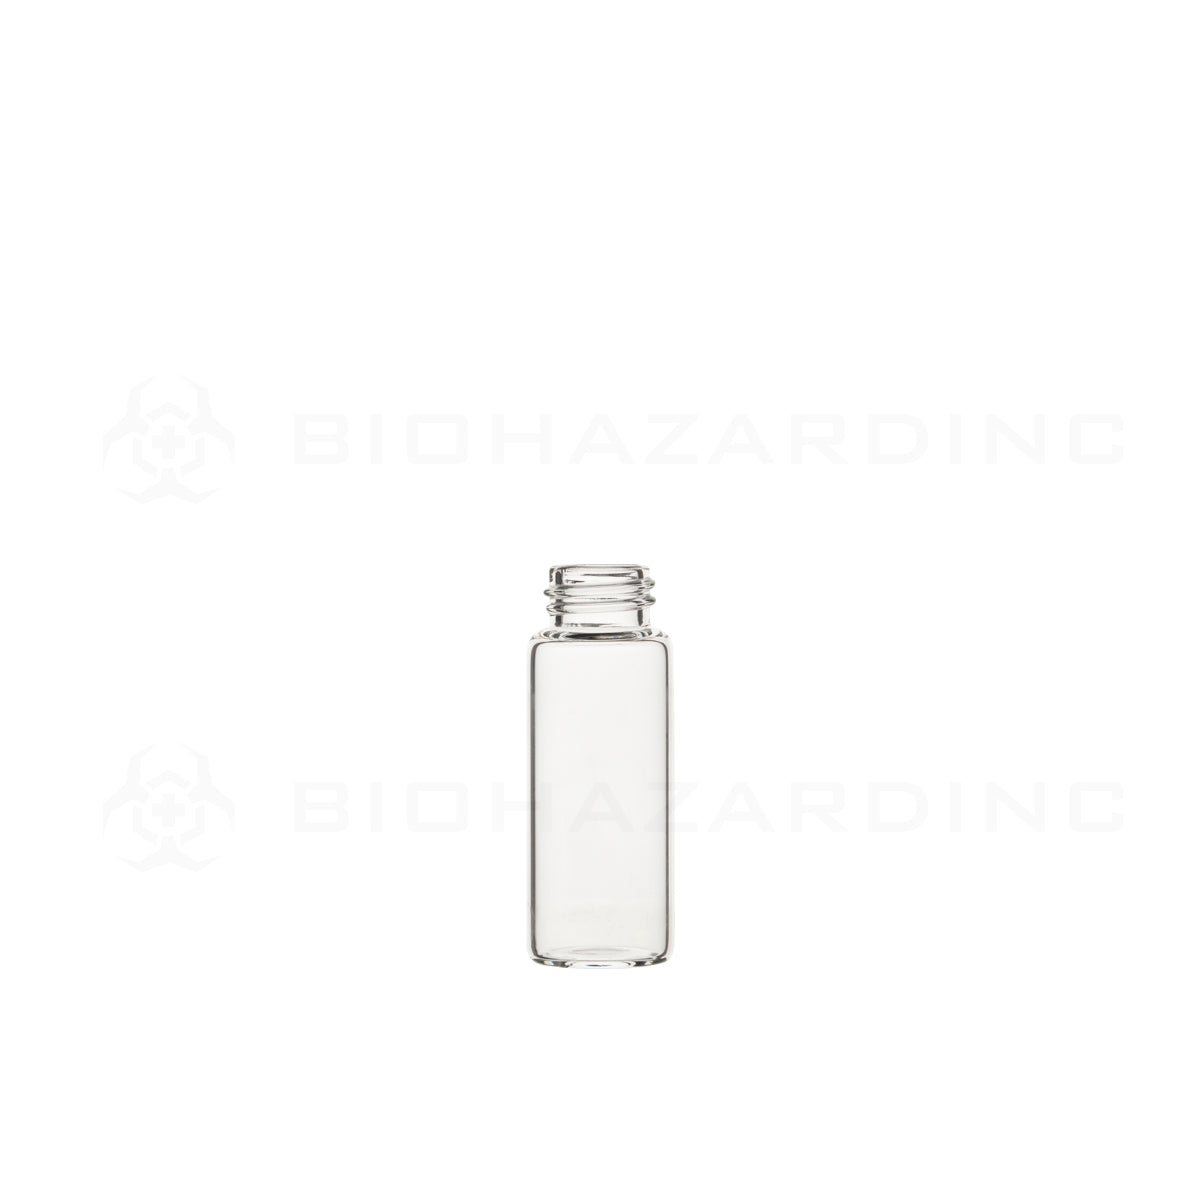 Glass Vial | Concentrate Container 50mm Tall | 15mm - 2 Dram - 298 Count Glass Vial Biohazard Inc   